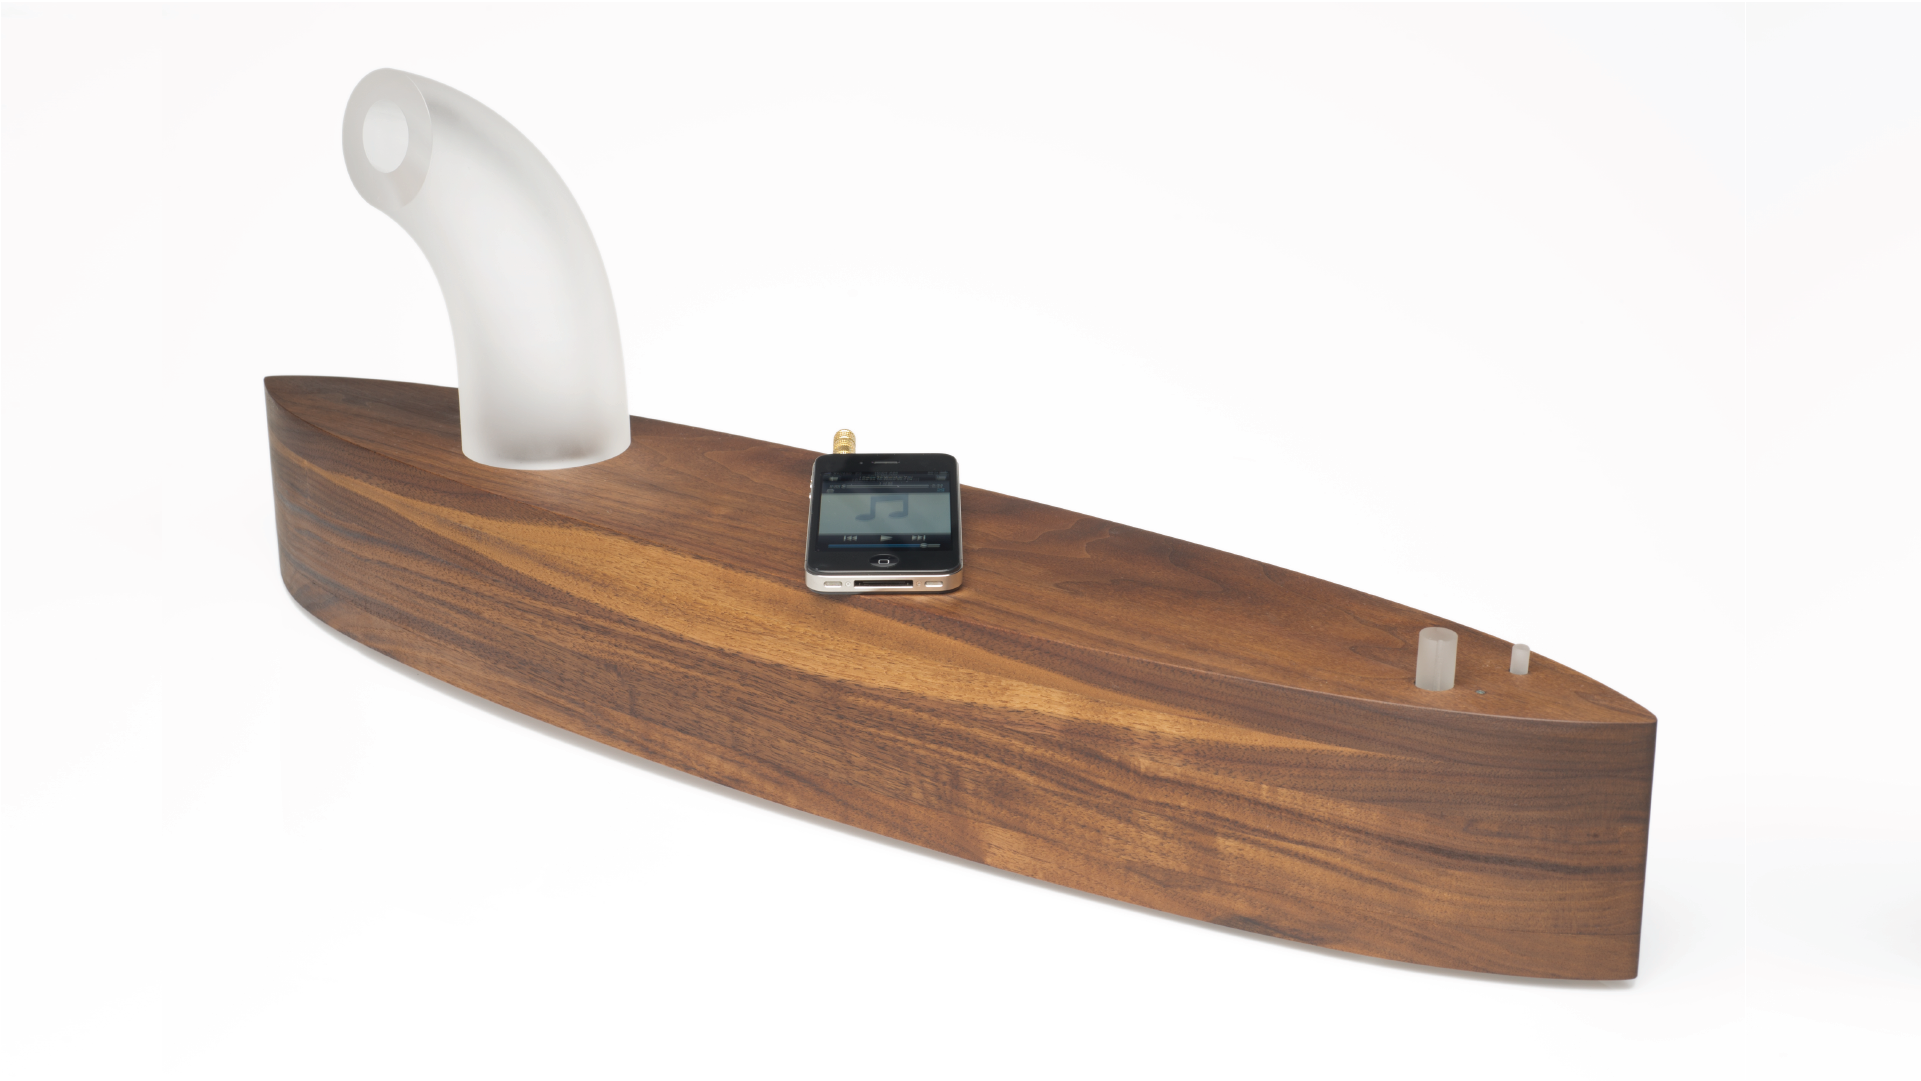 Speaker made with a solid wood piece as a base and a frost glass tube as channel for the sound.